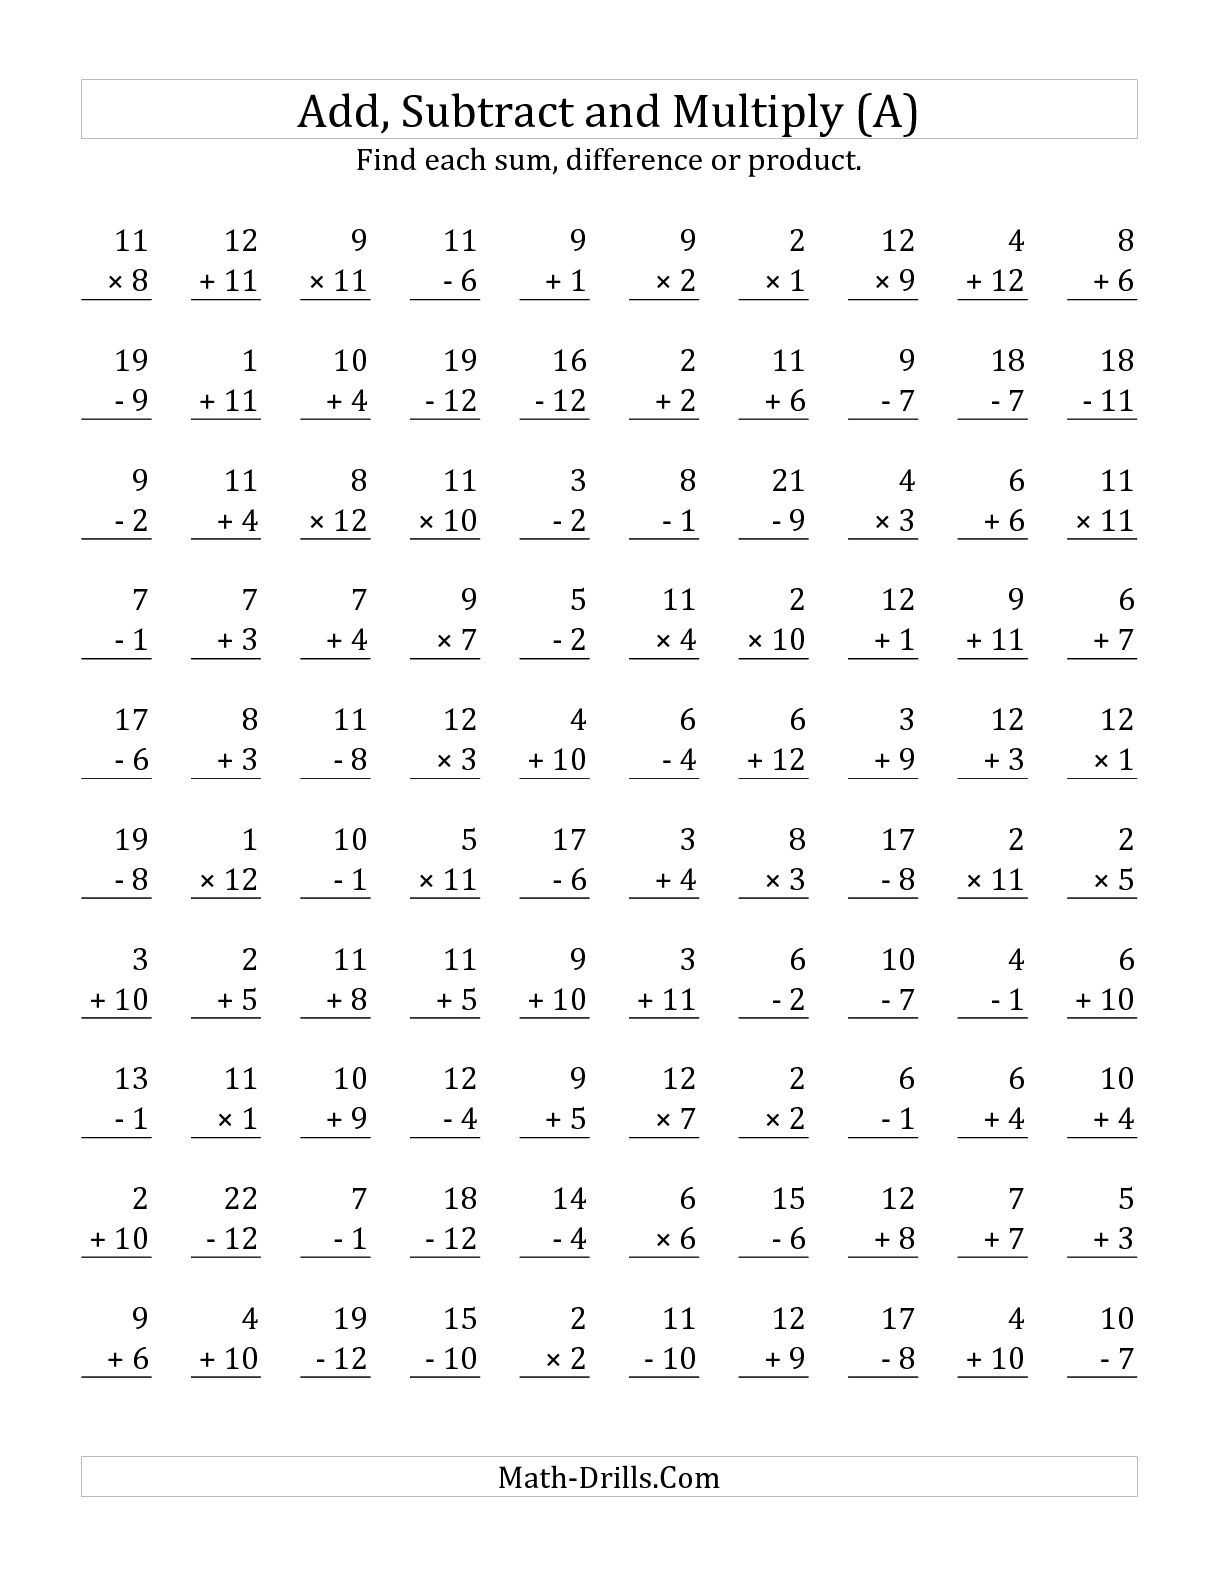 Adding and Subtracting Rational Numbers Worksheet or the Adding Subtracting and Multiplying with Facts From 1 to 12 A